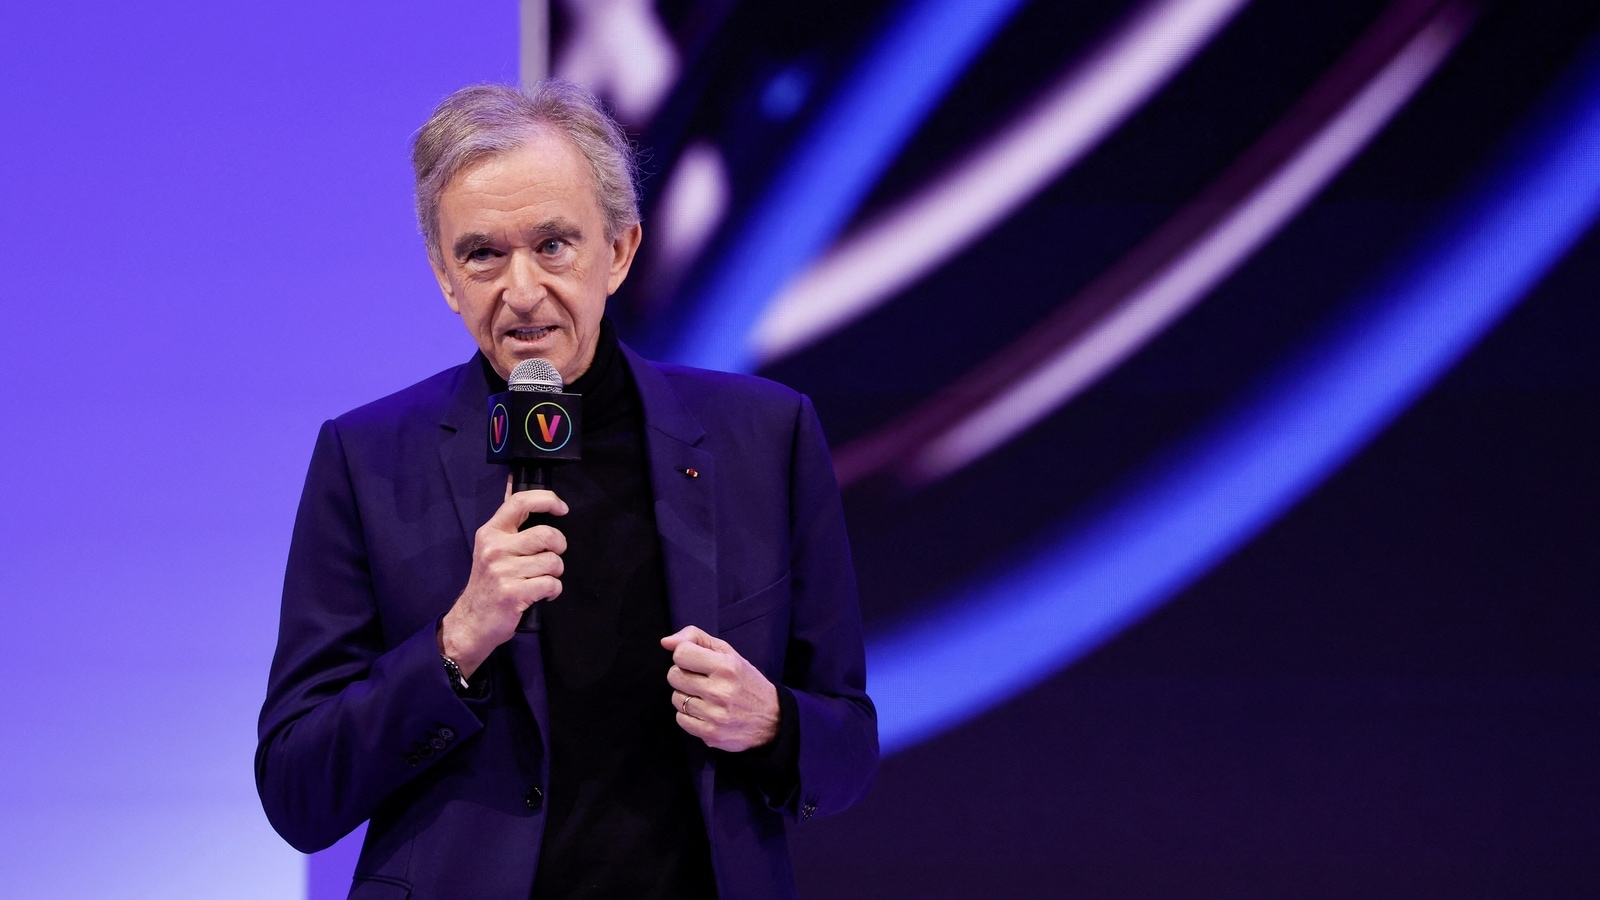 LVMH's Arnault is wary of the metaverse “bubble”. Should luxury be?